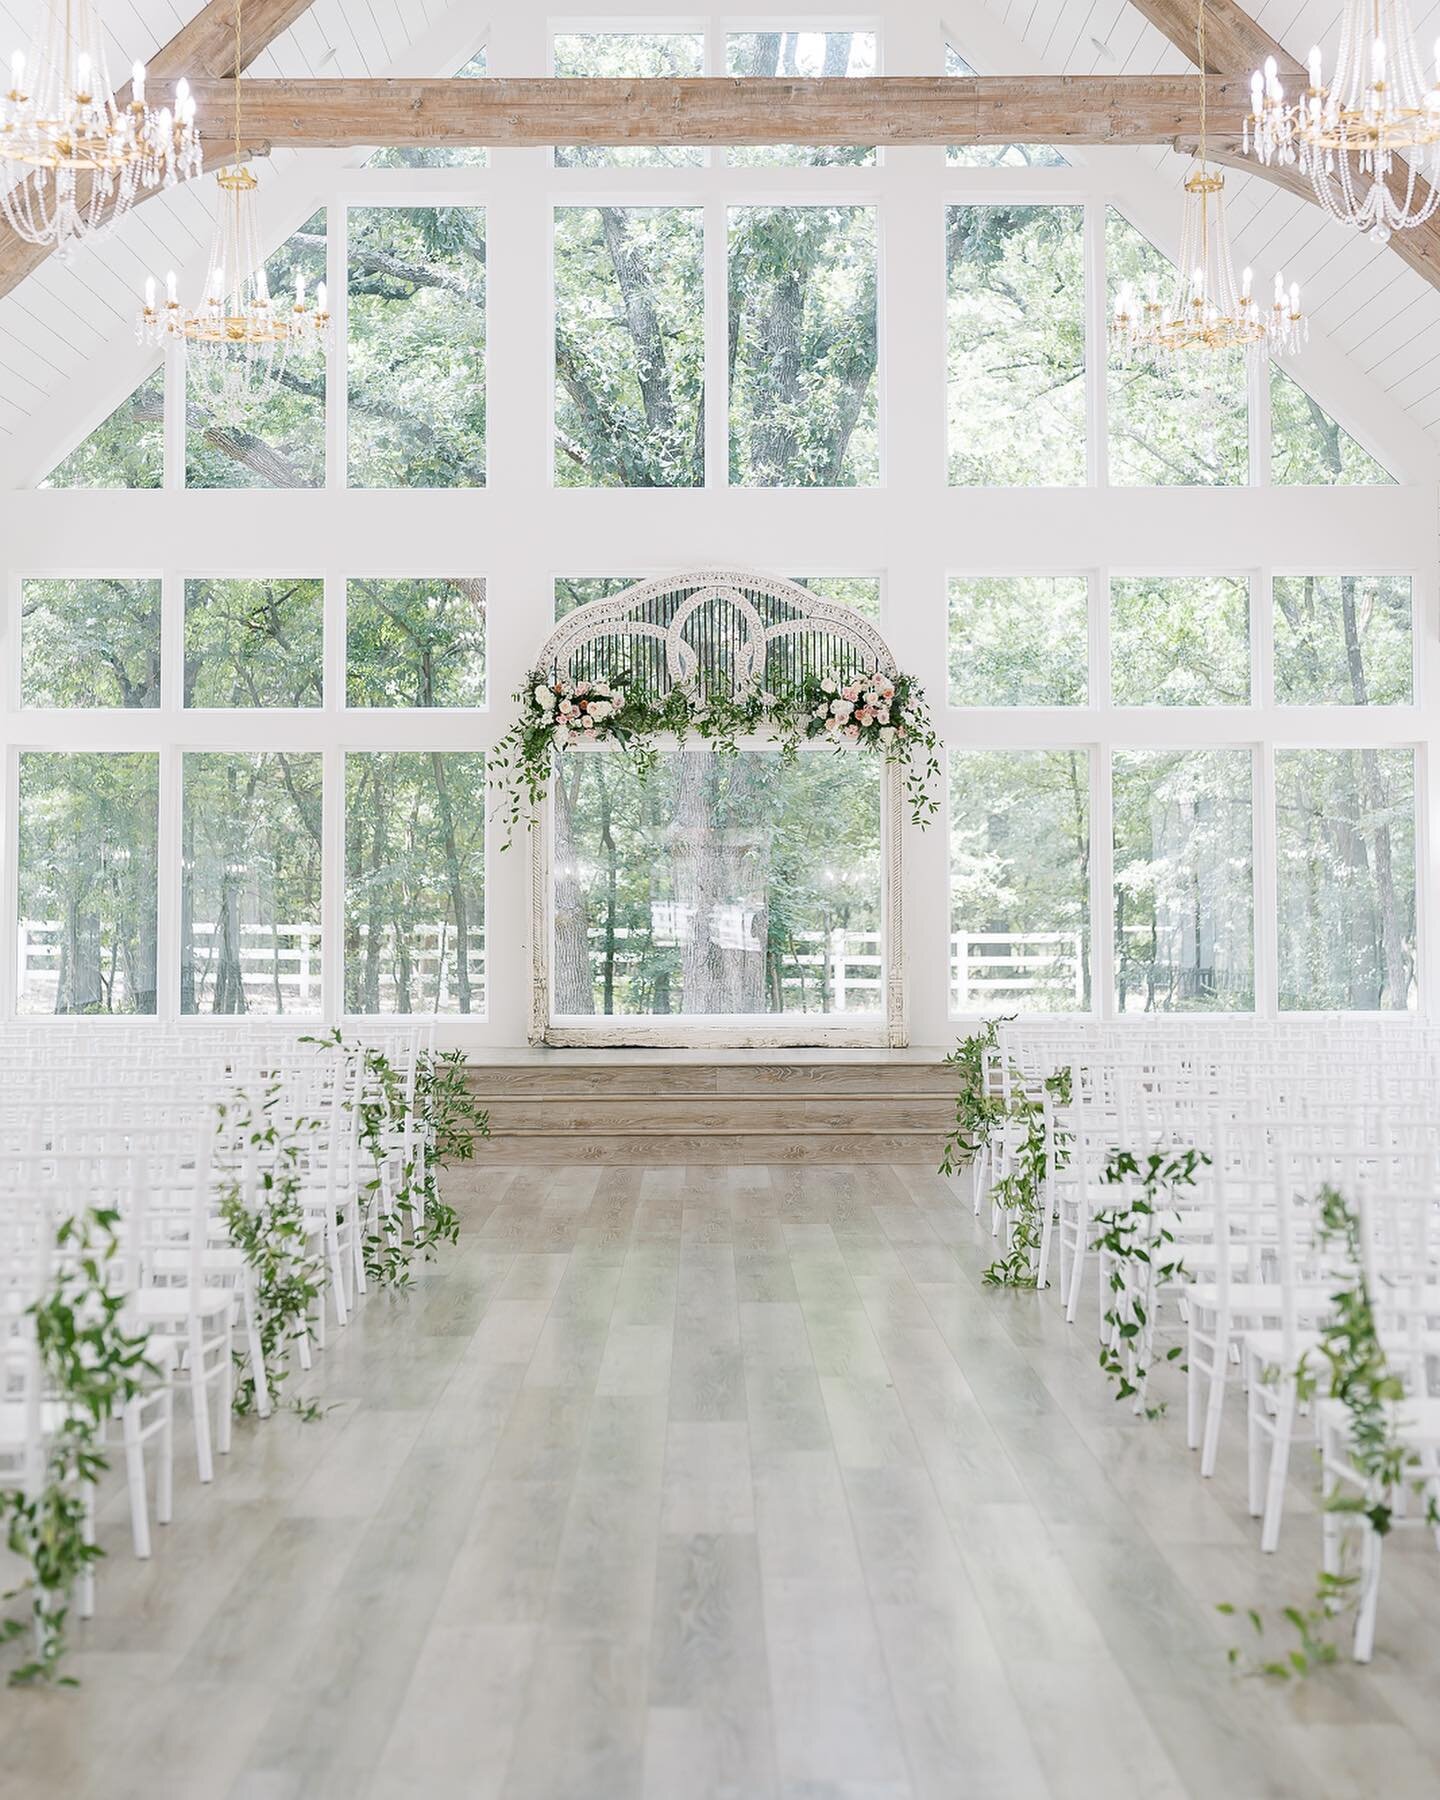 The sweetest floral touches for this stunning chapel. What a beautiful space to say &ldquo;I-do&rdquo; in! 

Venue @thefrenchfarmhousevenue 
Photographer @nicoleleaphotography
Floral @thelacebouquet
Coordinator @simplyelegantxo
@lmack628